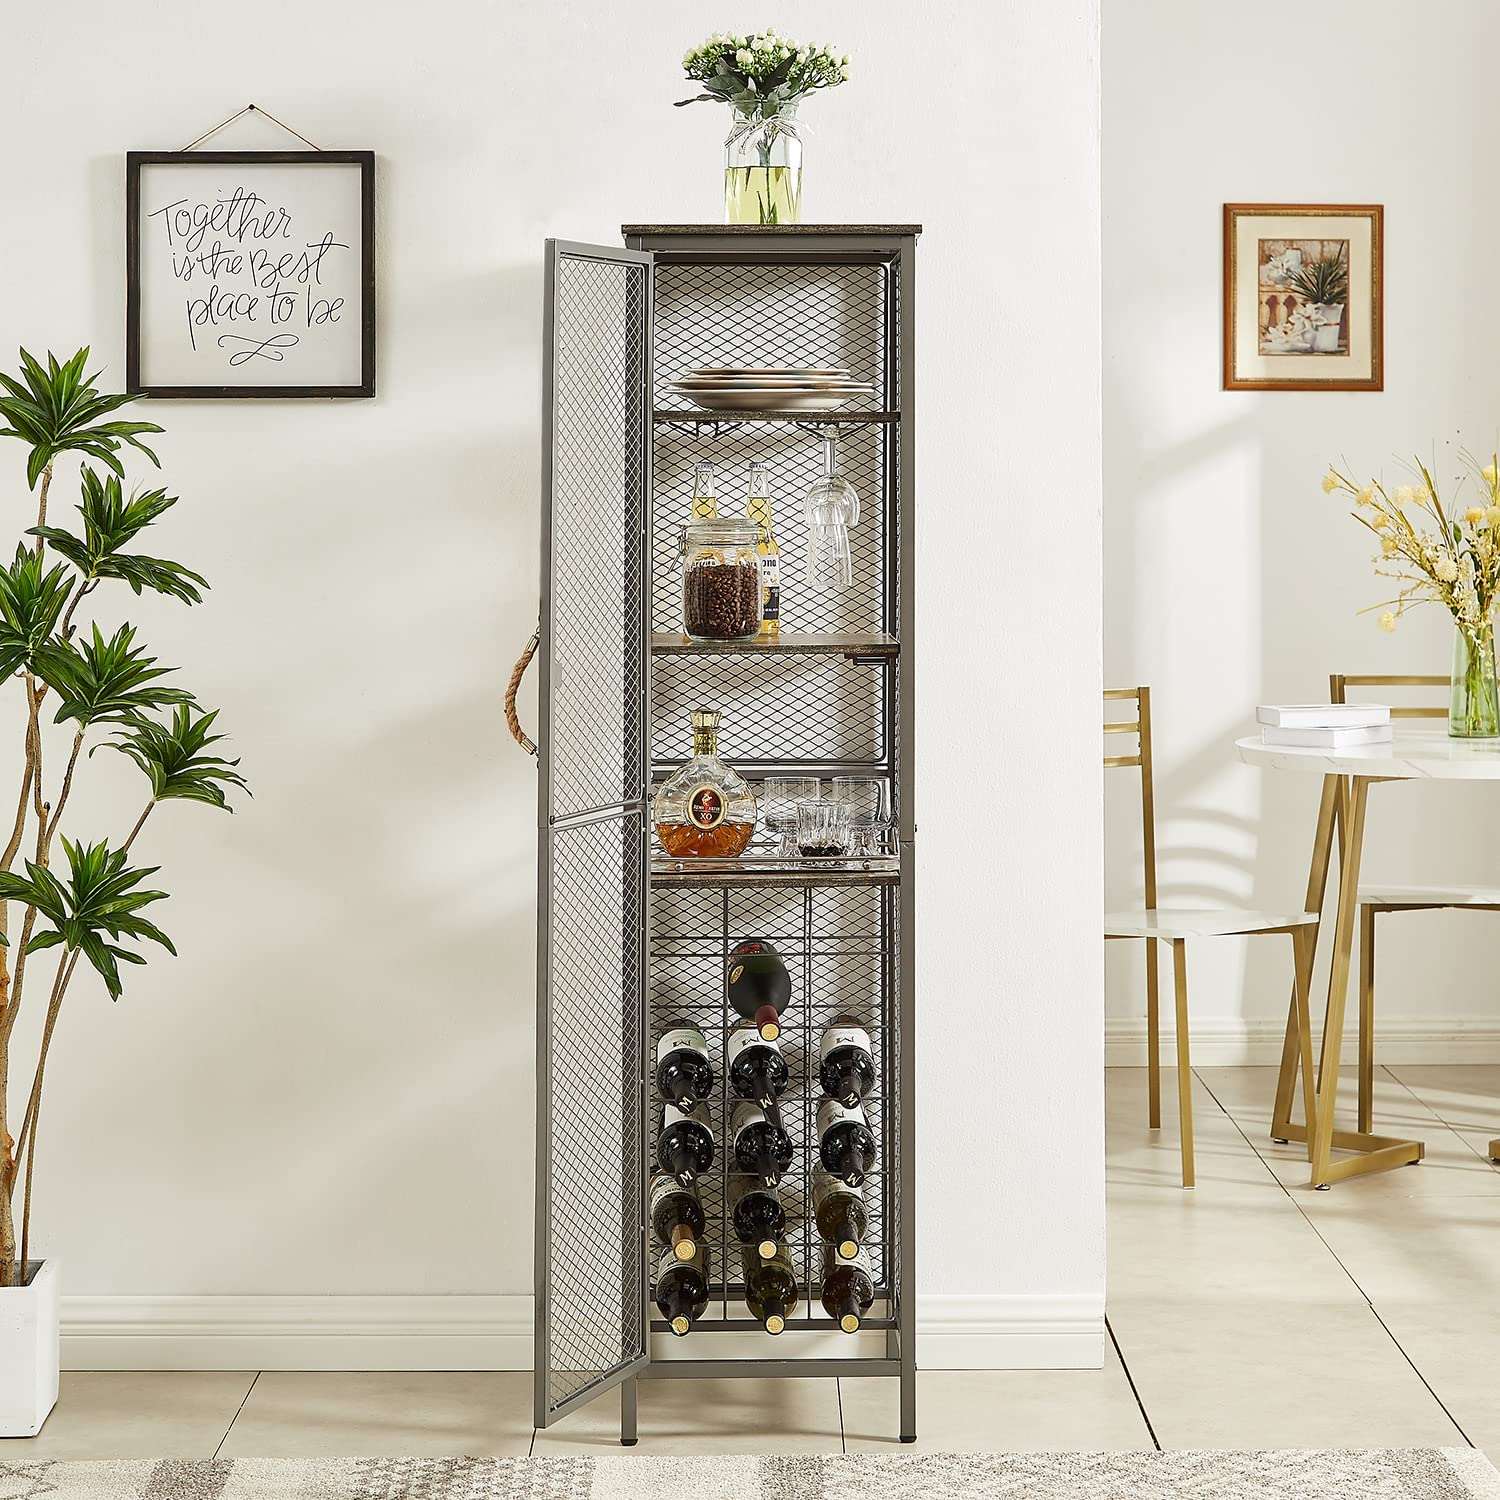 VECELO 3 tier Industrial Wine Bar Rack Storage Cabinet for Liquor and Glasses Holder Dishes